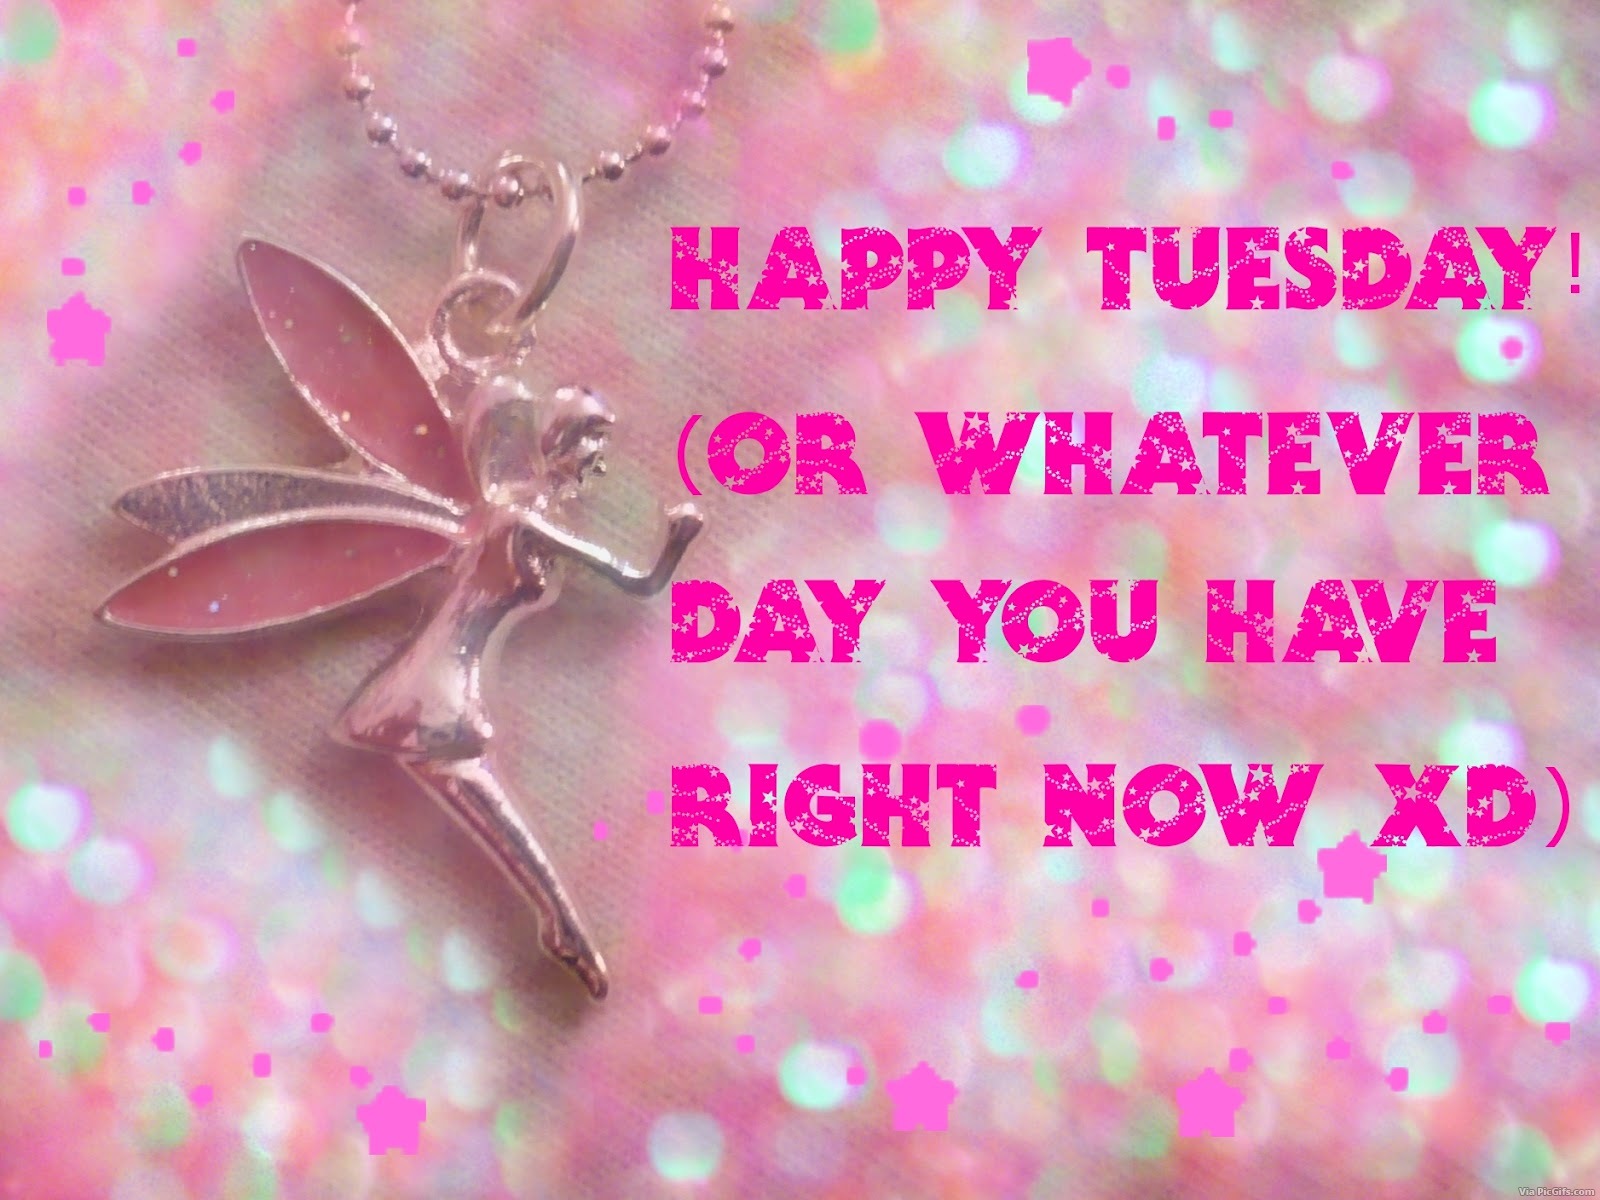 Tuesday facebook graphics